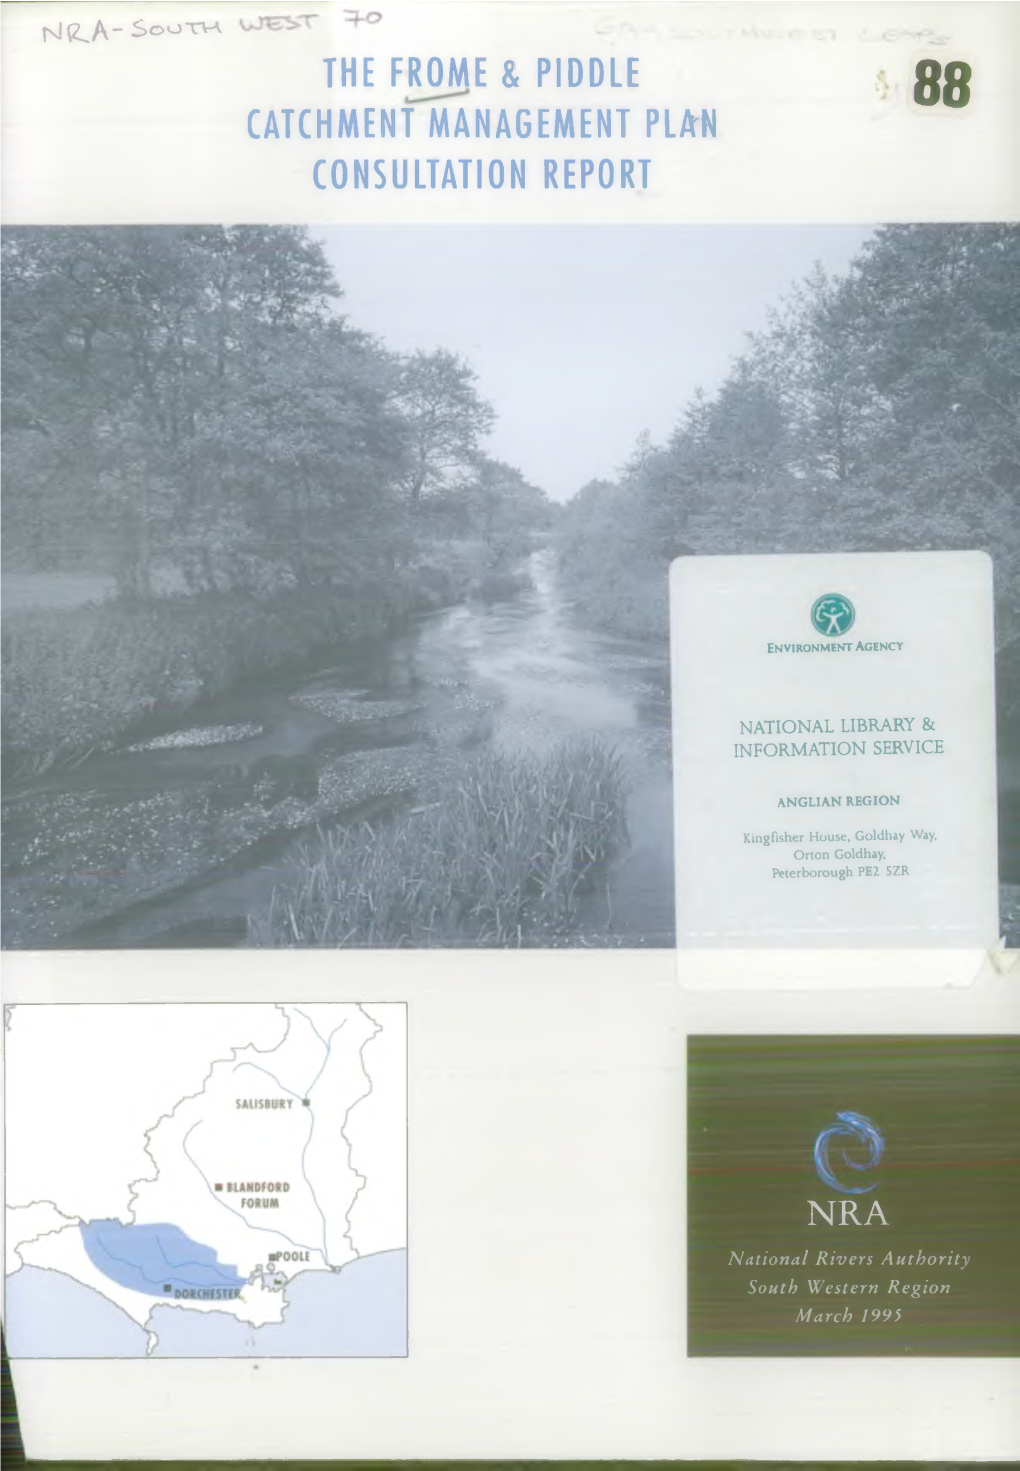 The Frome 8, Piddle Catchmentmanagement Plan 88 Consultation Report